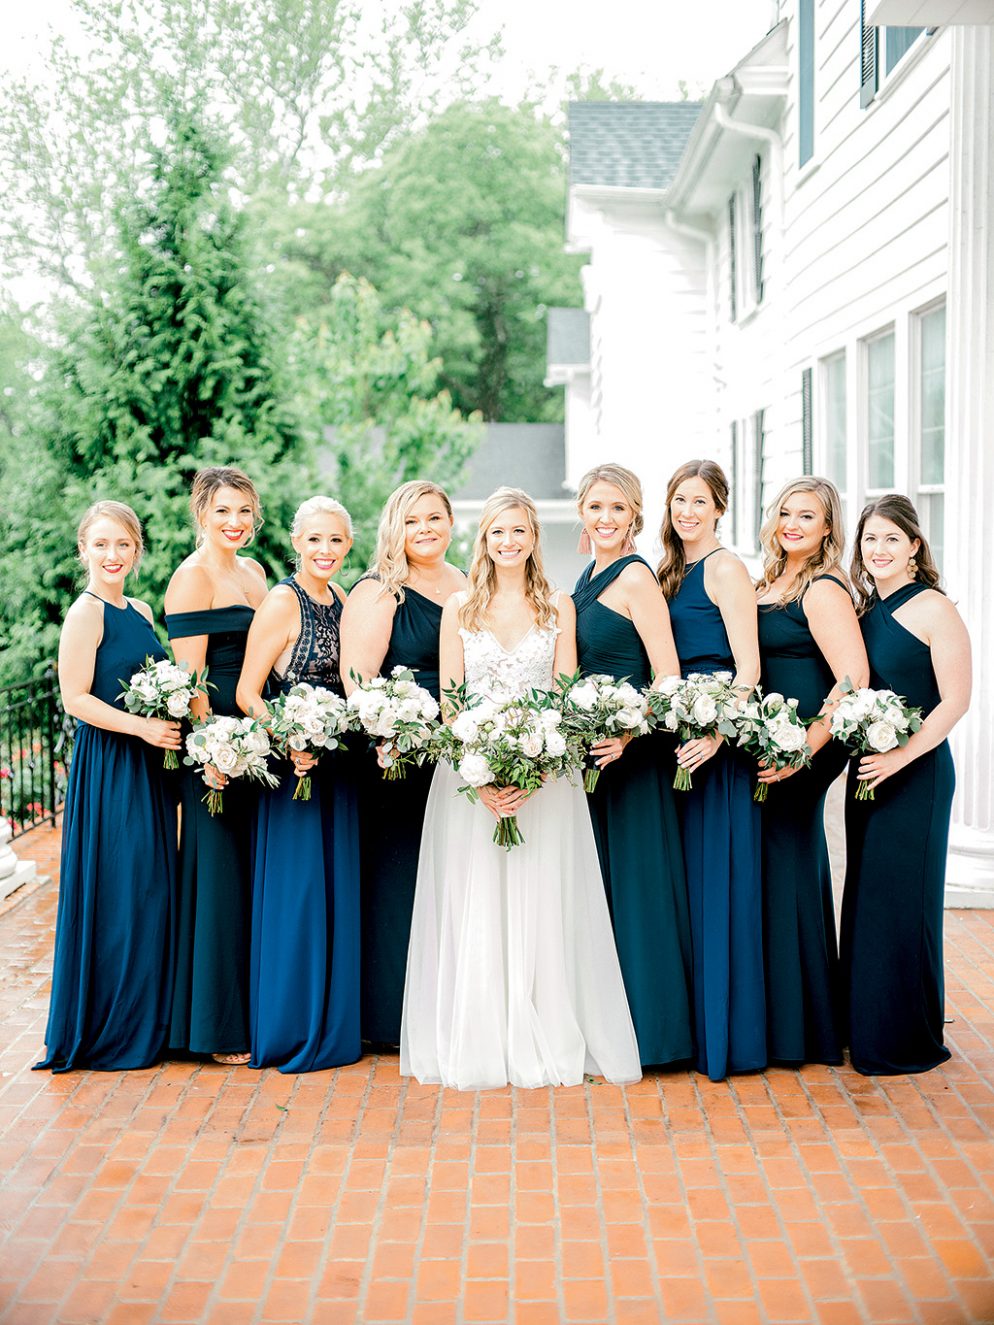 Winter Weddings, Emerald Green, and Flower Girl Posies: Check Out These ...